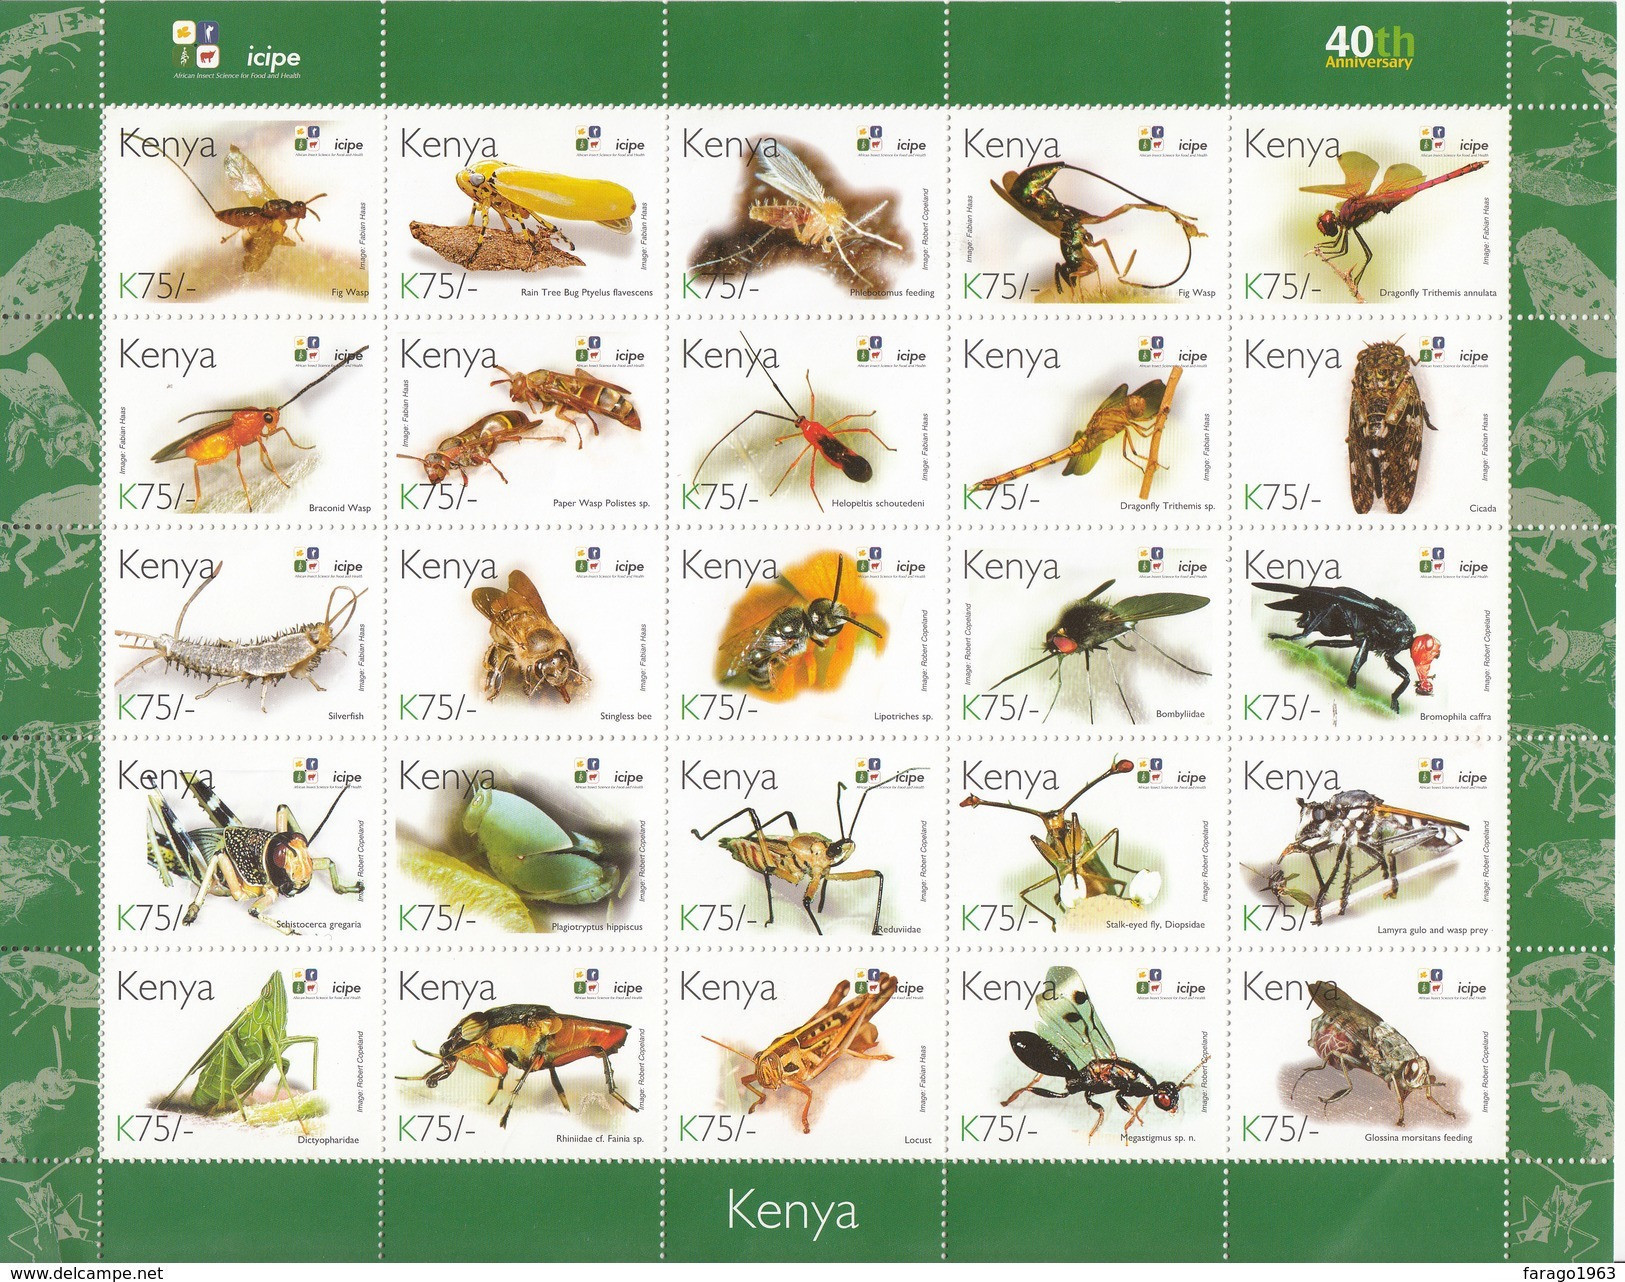 2011  Kenya ICIPE Insects 75 Shilling  Complete Sheet Of 25 Different MNH Stamps ICIPE Is Based In East Africa! - Kenya (1963-...)